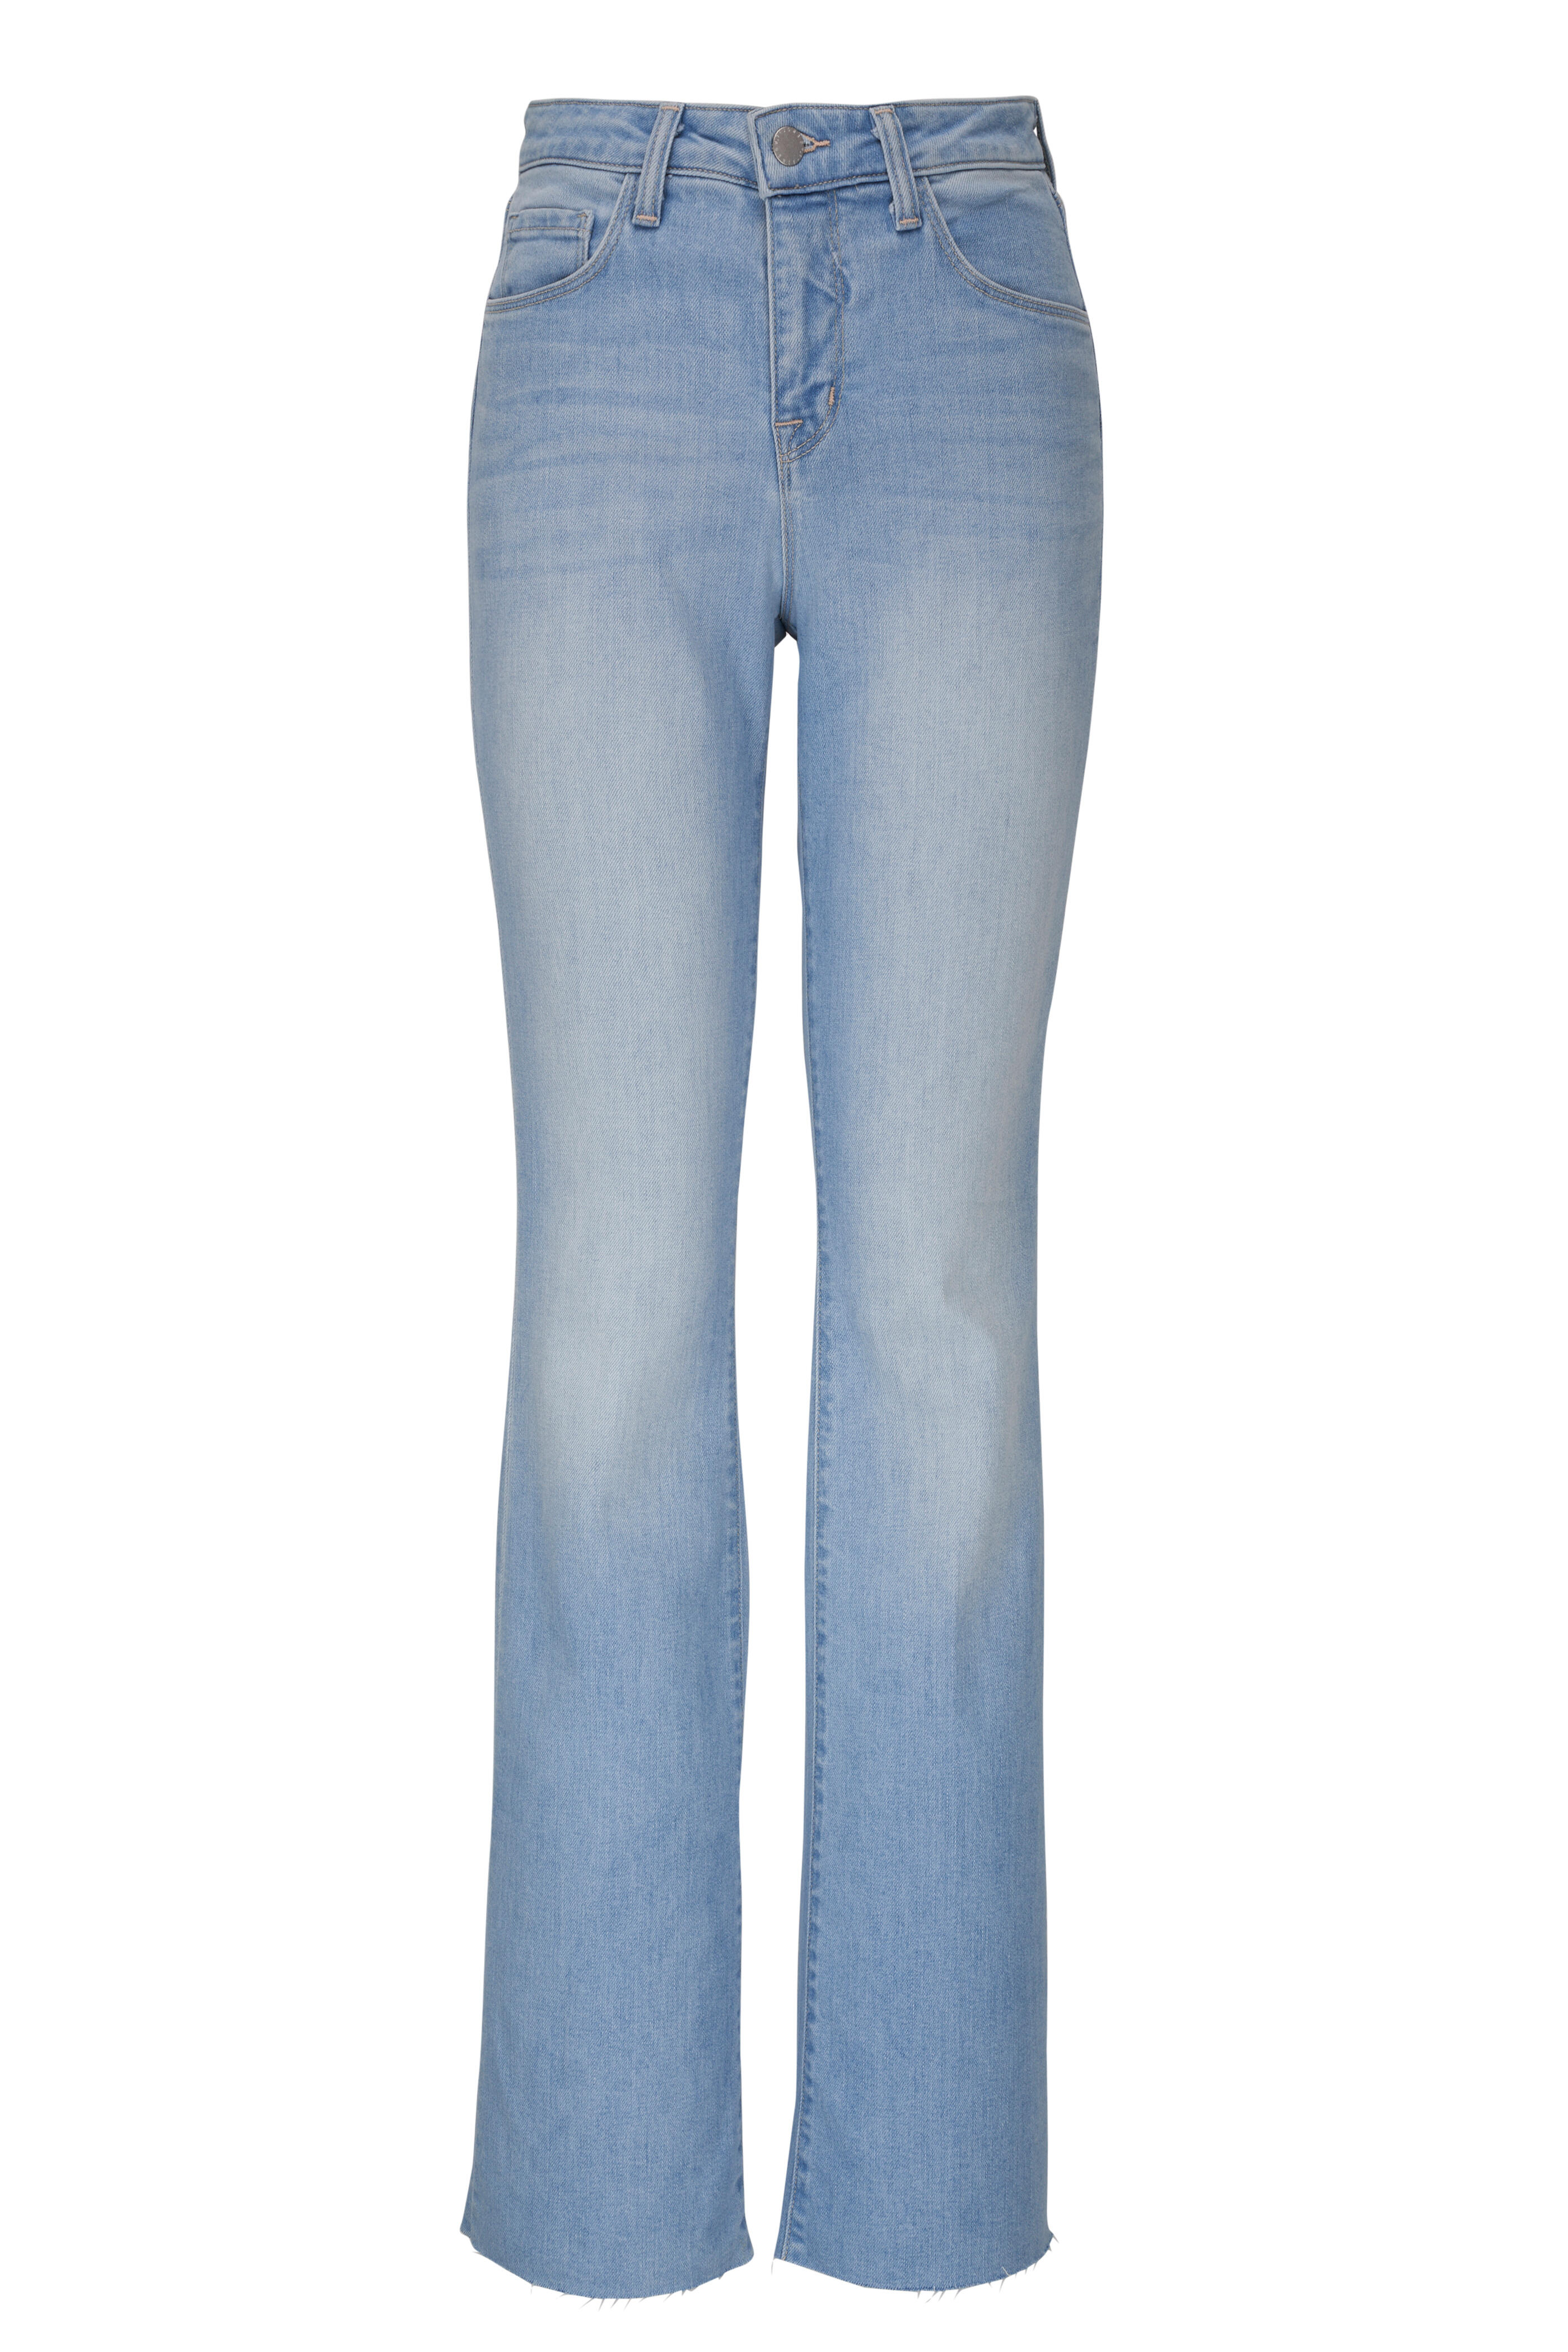 L'Agence - Ruth Omaha Straight Jean | Mitchell Stores